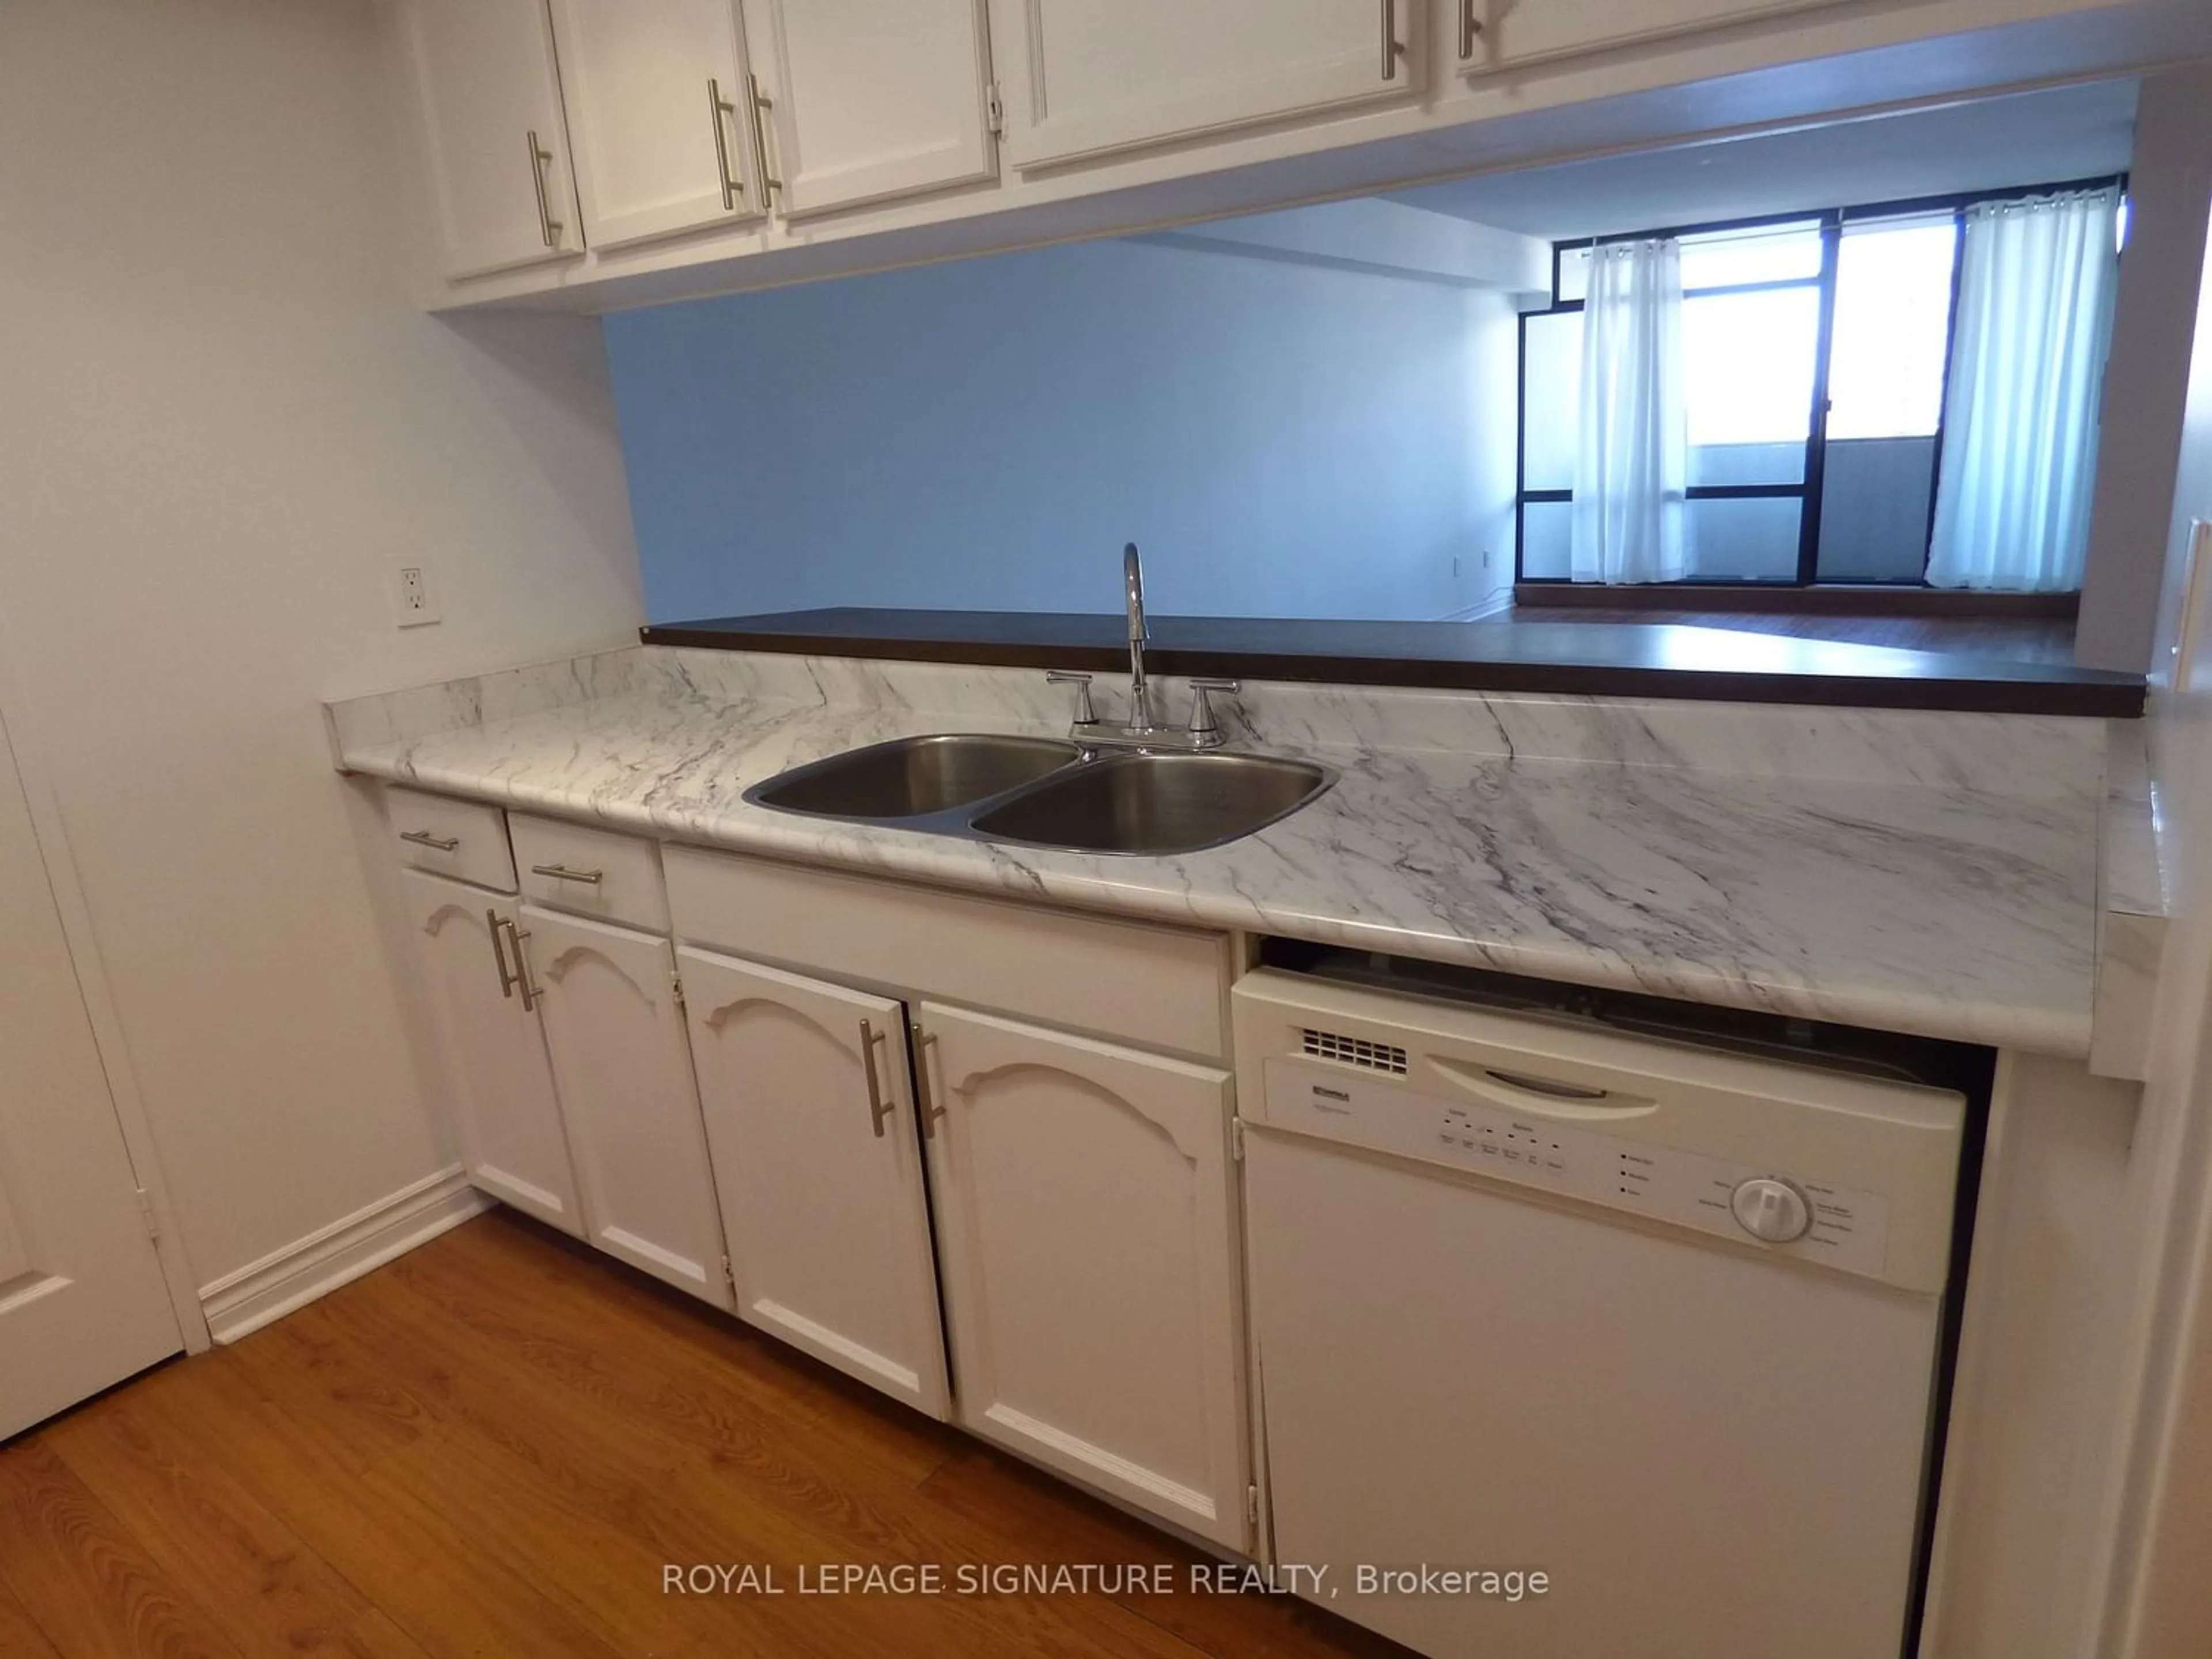 Standard kitchen for 1555 Finch Ave #2002, Toronto Ontario M2J 4X9